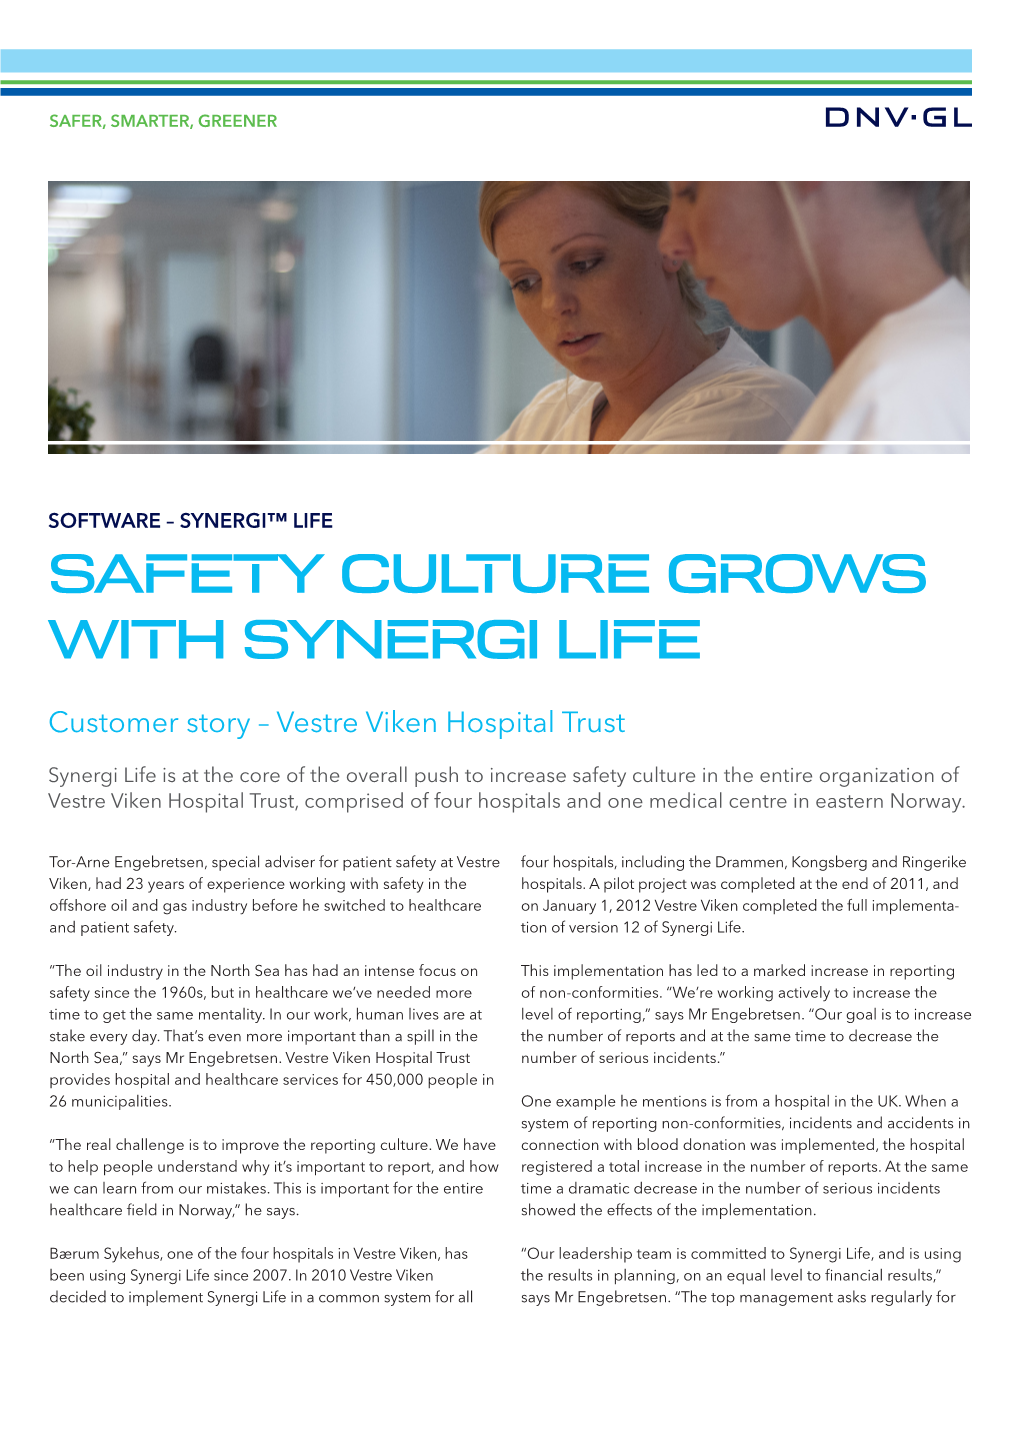 Safety Culture Grows with Synergi Life